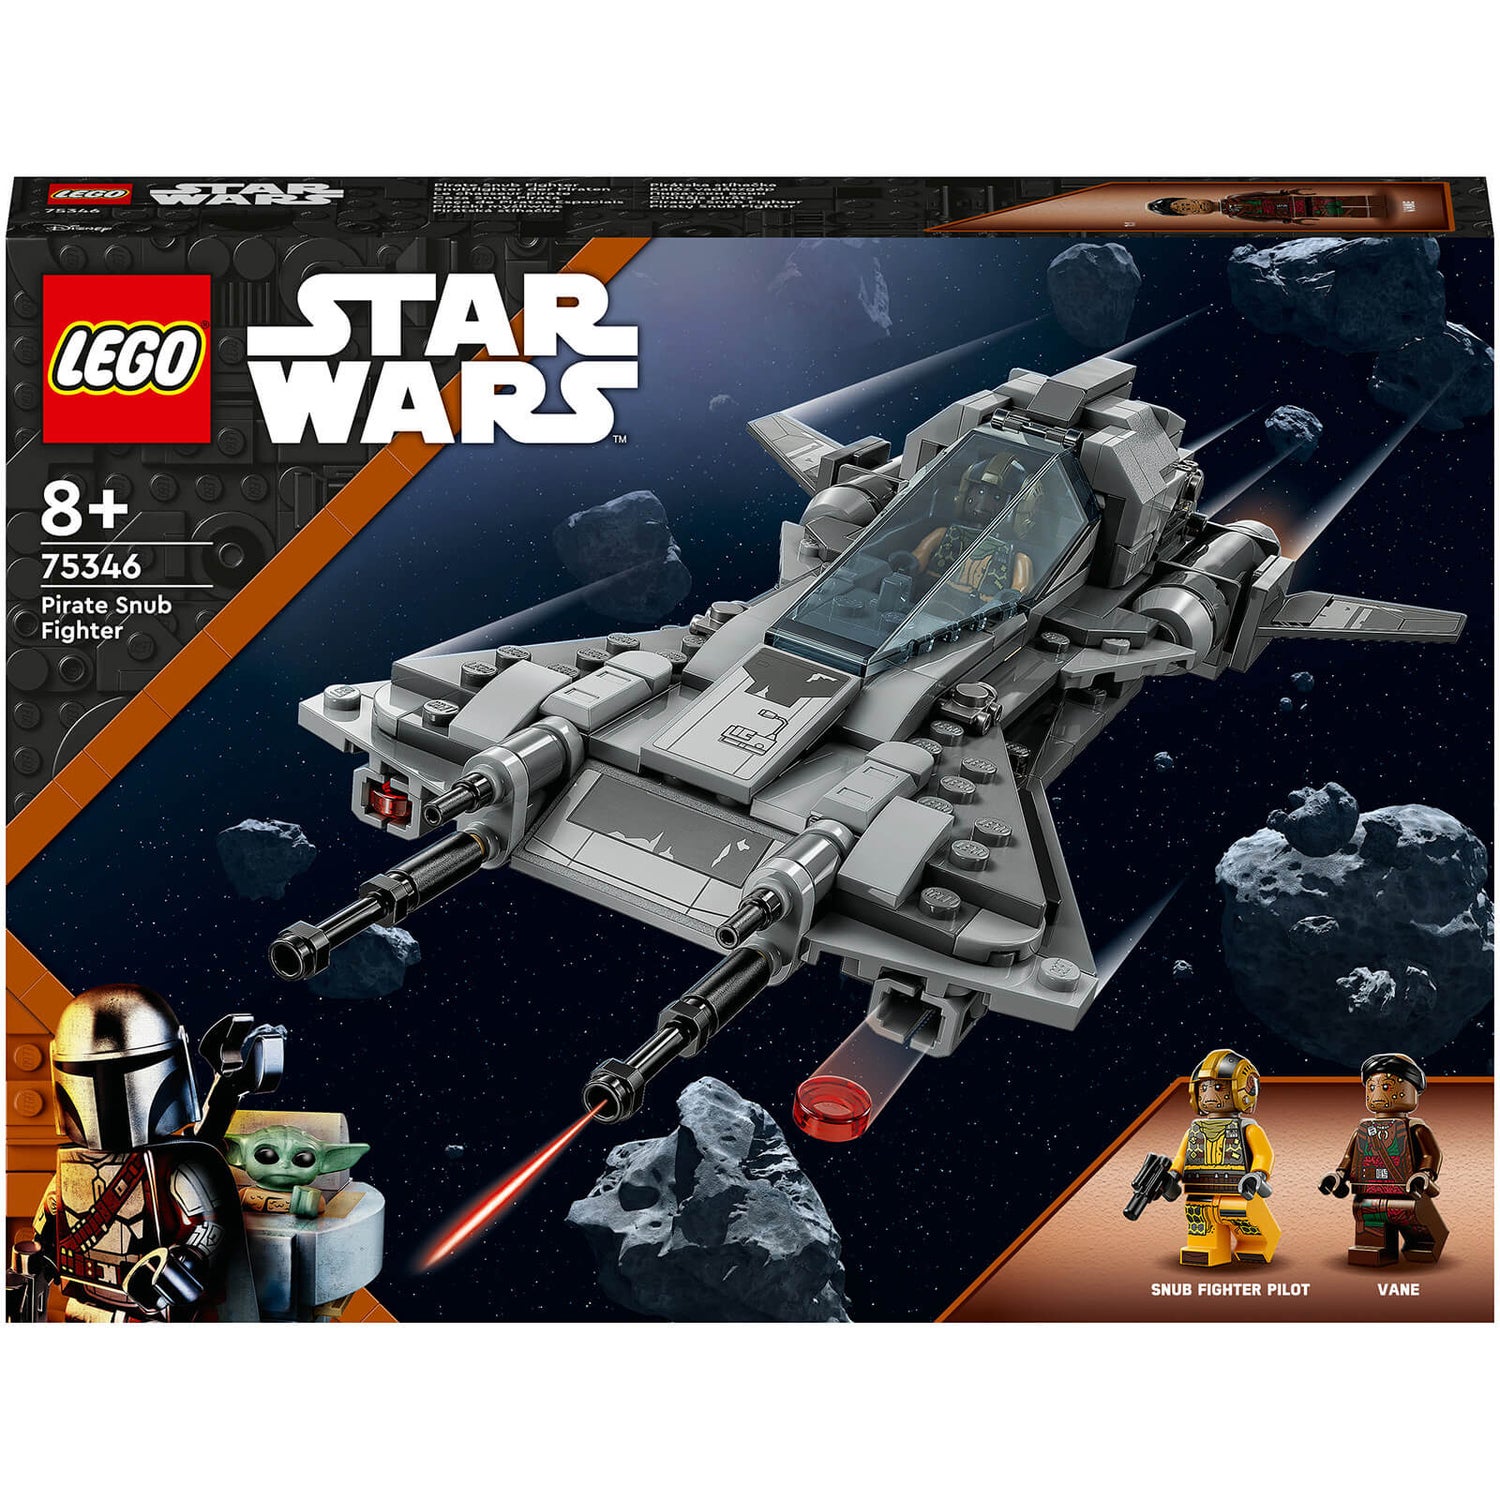 Can you recreate this with any of the Lego art sets currently on the  market? : r/legostarwars